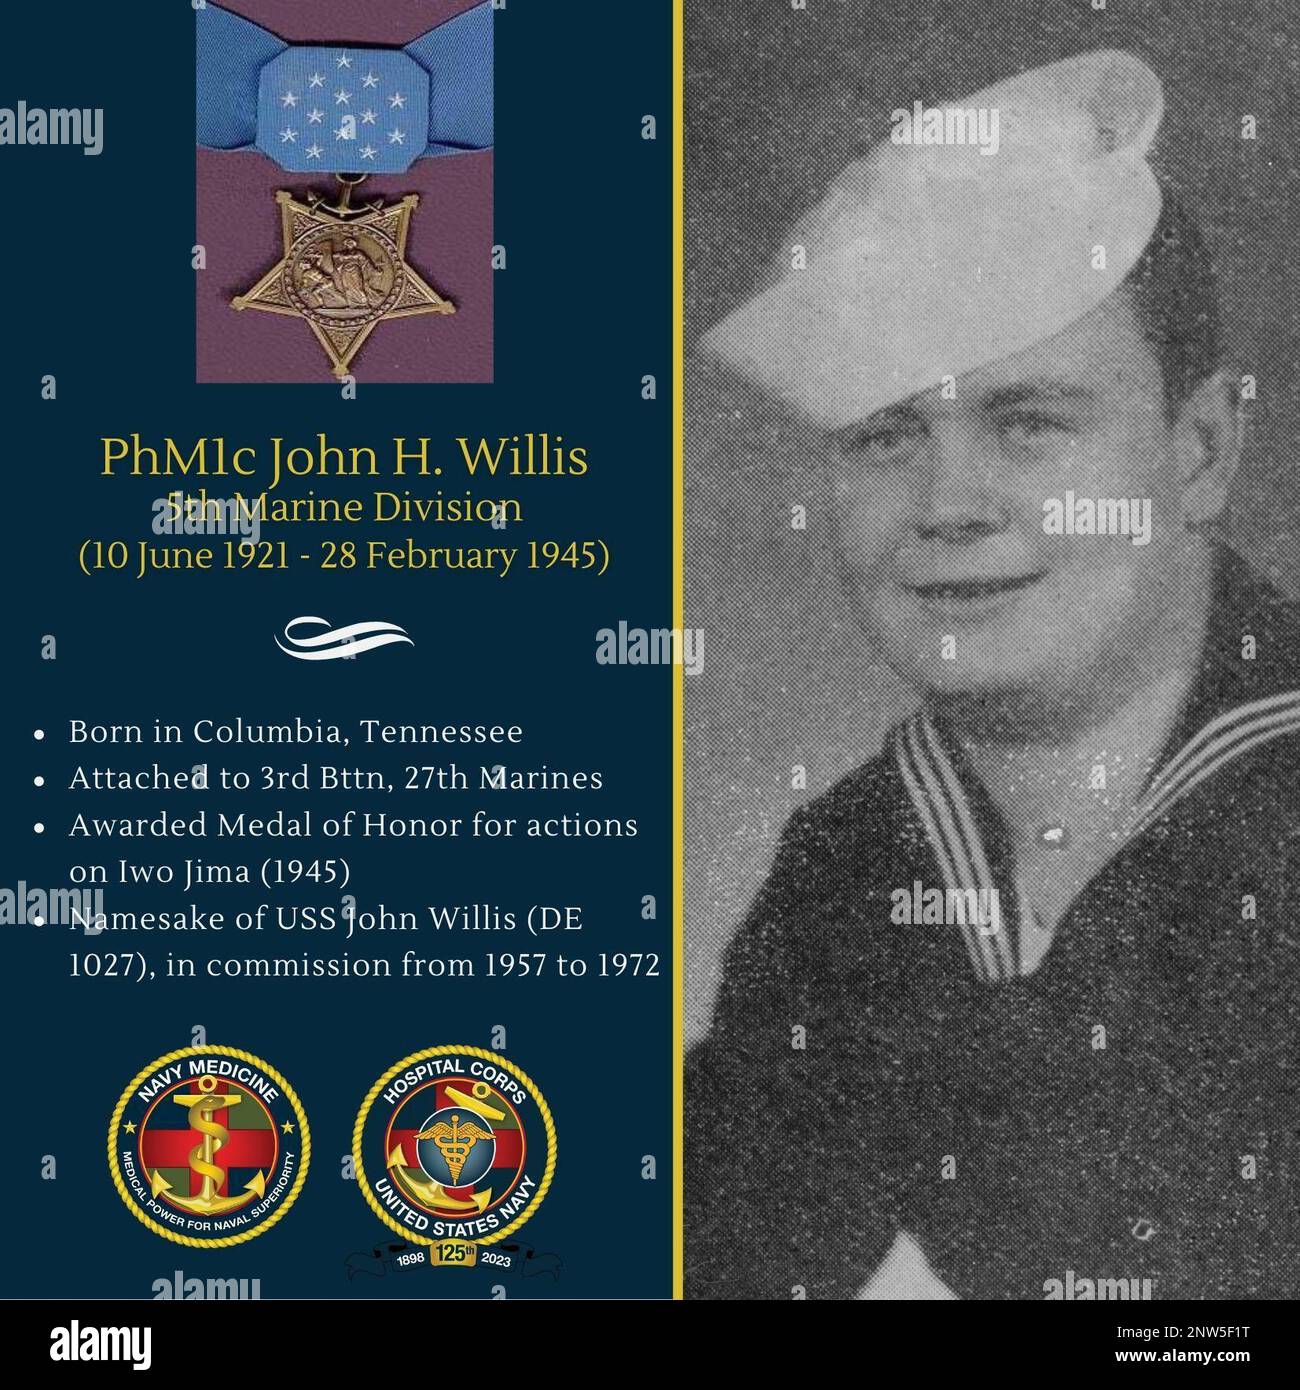 On February 28, 1945, while serving on Iwo Jima, Pharmacist's  Mate First Class John Harlan Willis was constantly imperiled by artillery and mortar fire from strong and mutually supporting pillboxes and caves studding Hill 362 in the enemy's cross-island defenses. He resolutely administered first aid to the many Marines wounded during the furious close-in fighting until he himself was struck by shrapnel and was ordered back to the battle-aid station. Without waiting for official medical release, he quickly returned to his company and, during a savage hand-to-hand enemy counterattack, daringly Stock Photo